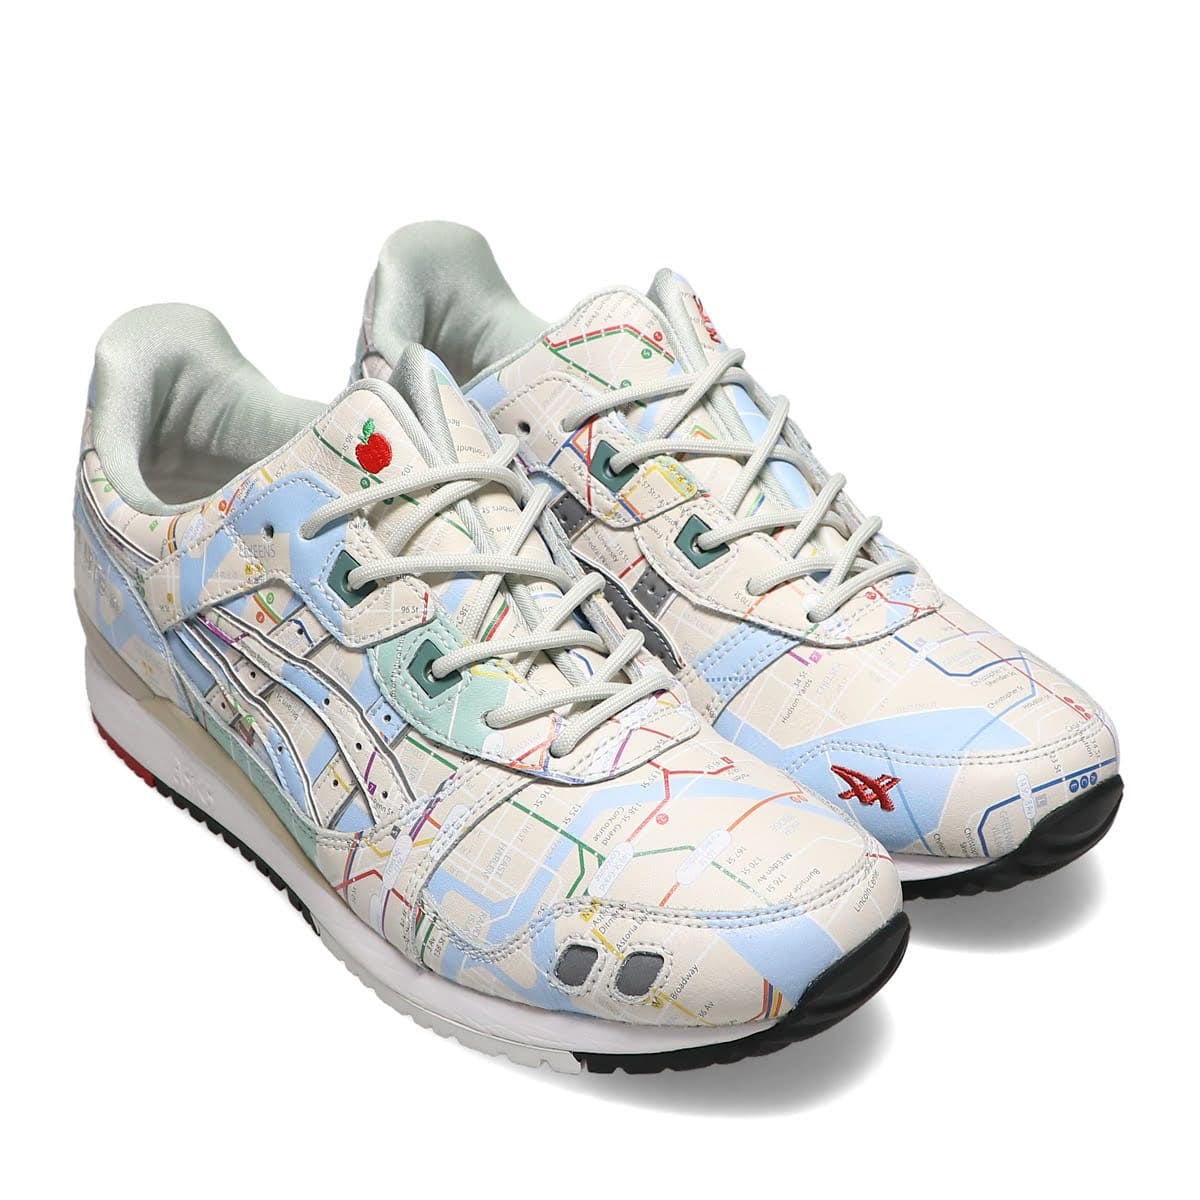 asics GEL-LYTE III OG BIRCH/PURE SILVER 22SS-S_photo_large